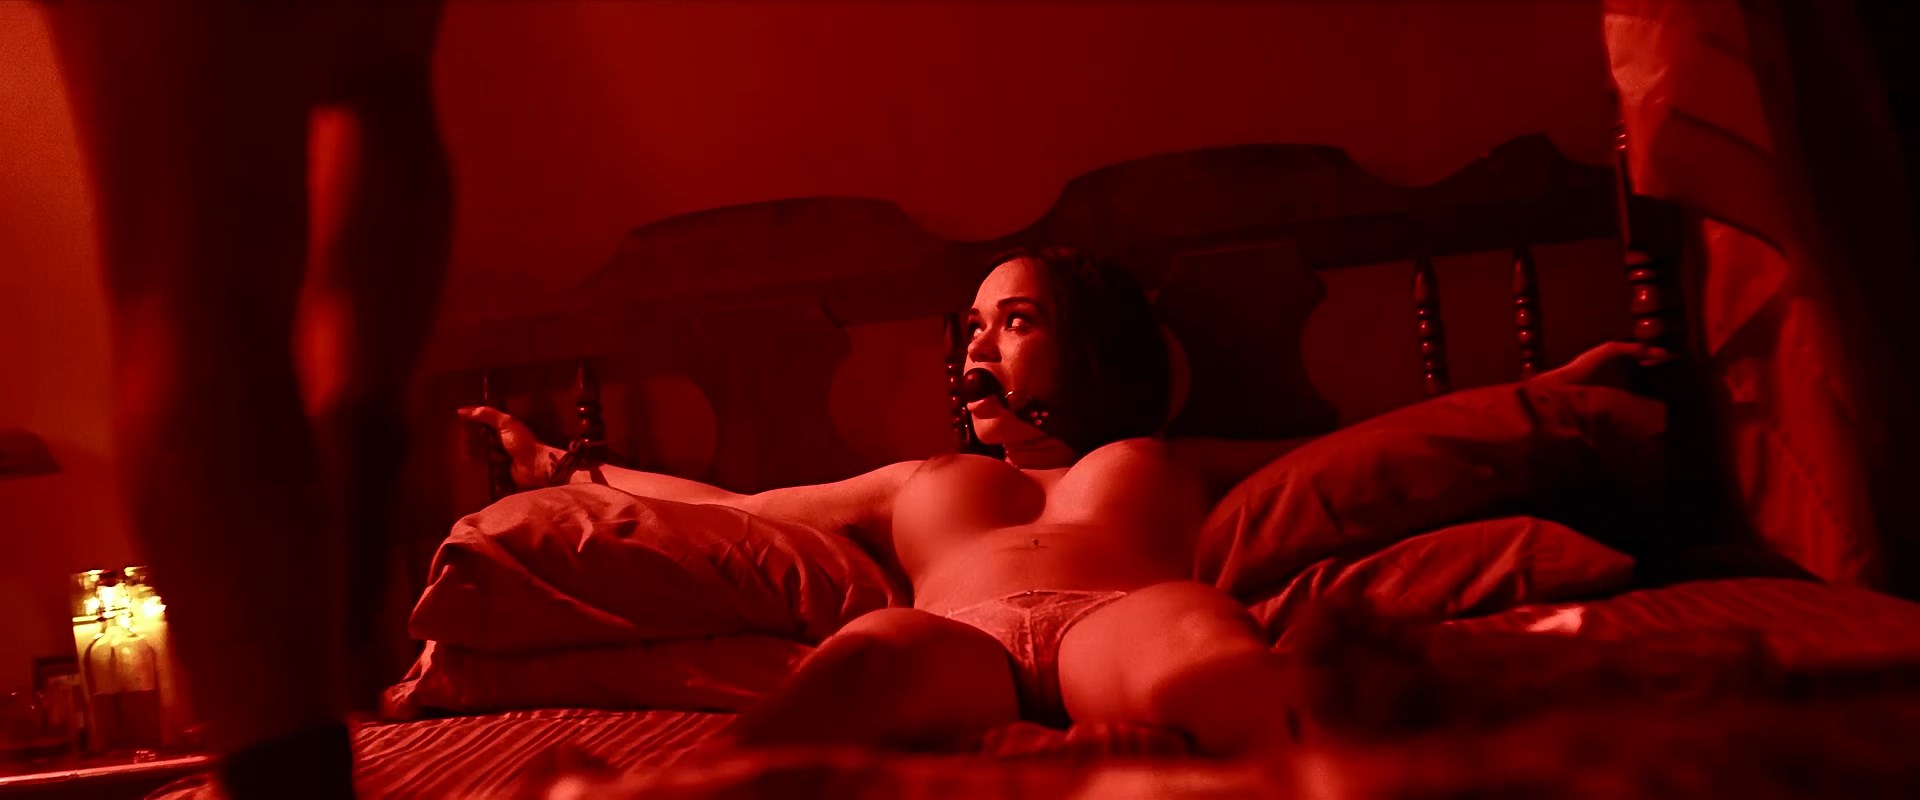 Emily Mena nude, Kyuubi Arbogast nude - Rottentail (2018)